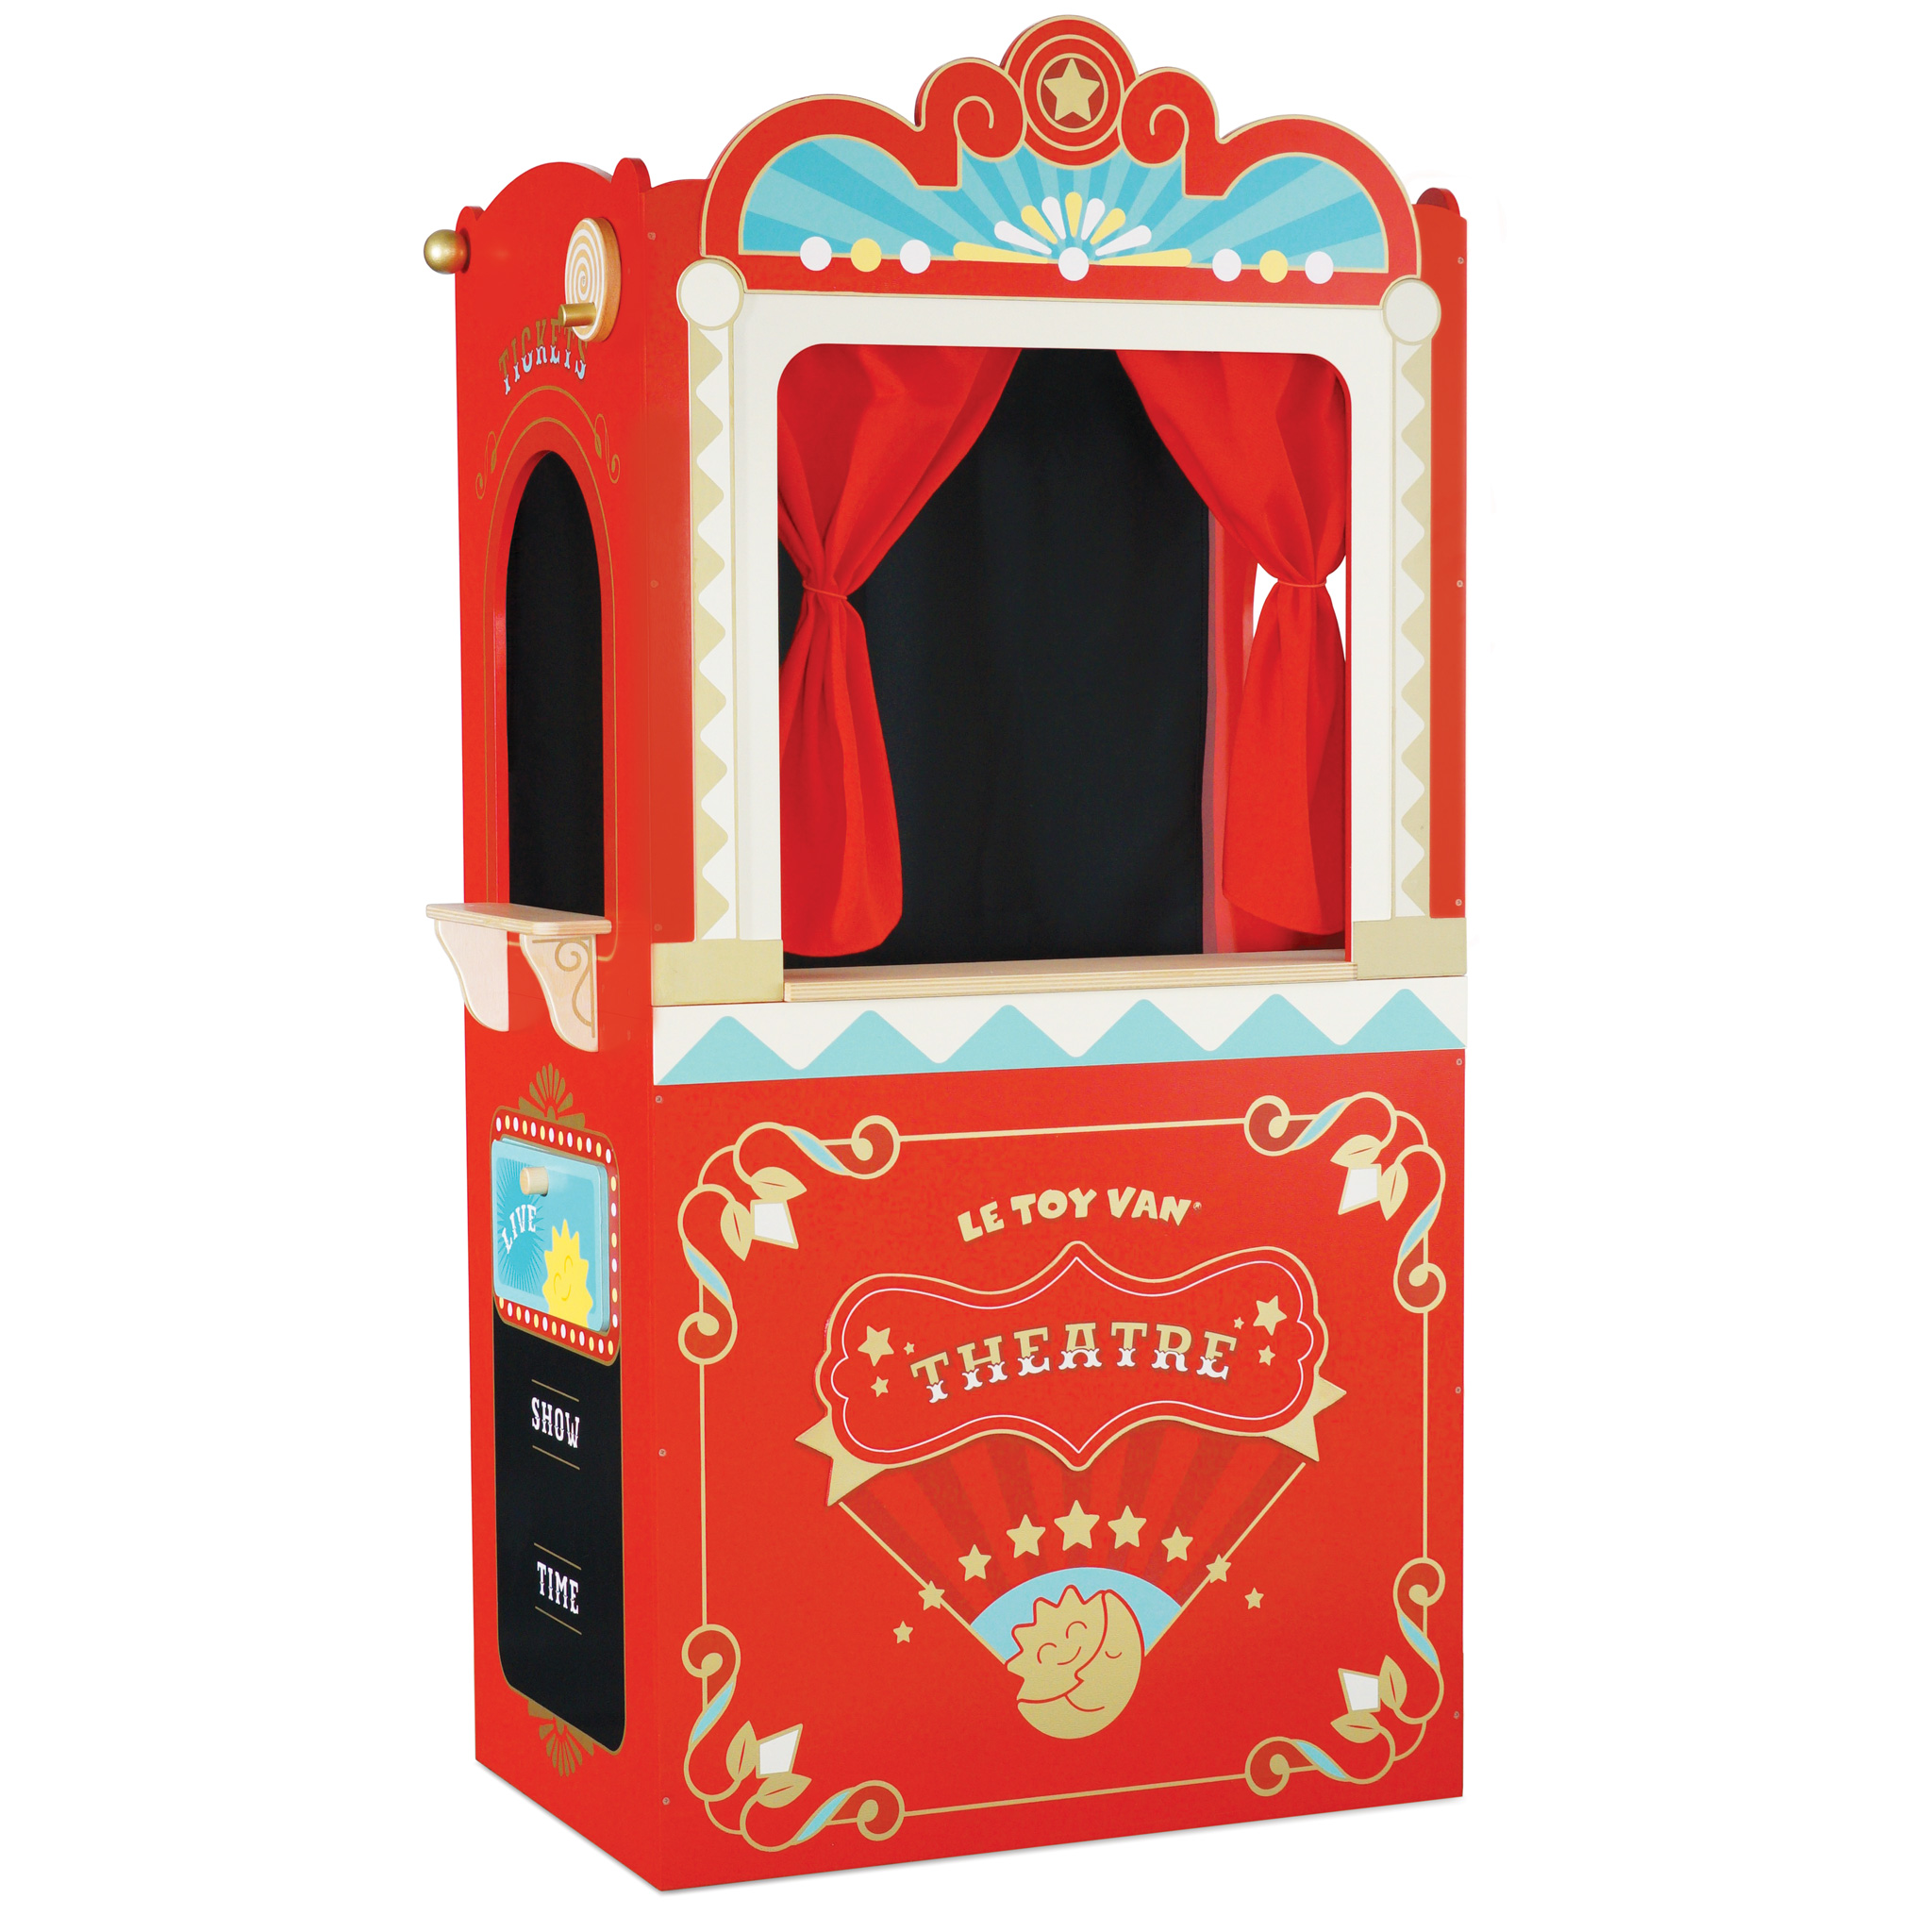 Showtime Puppentheater / Retro Toy Puppet Theatre - 2022